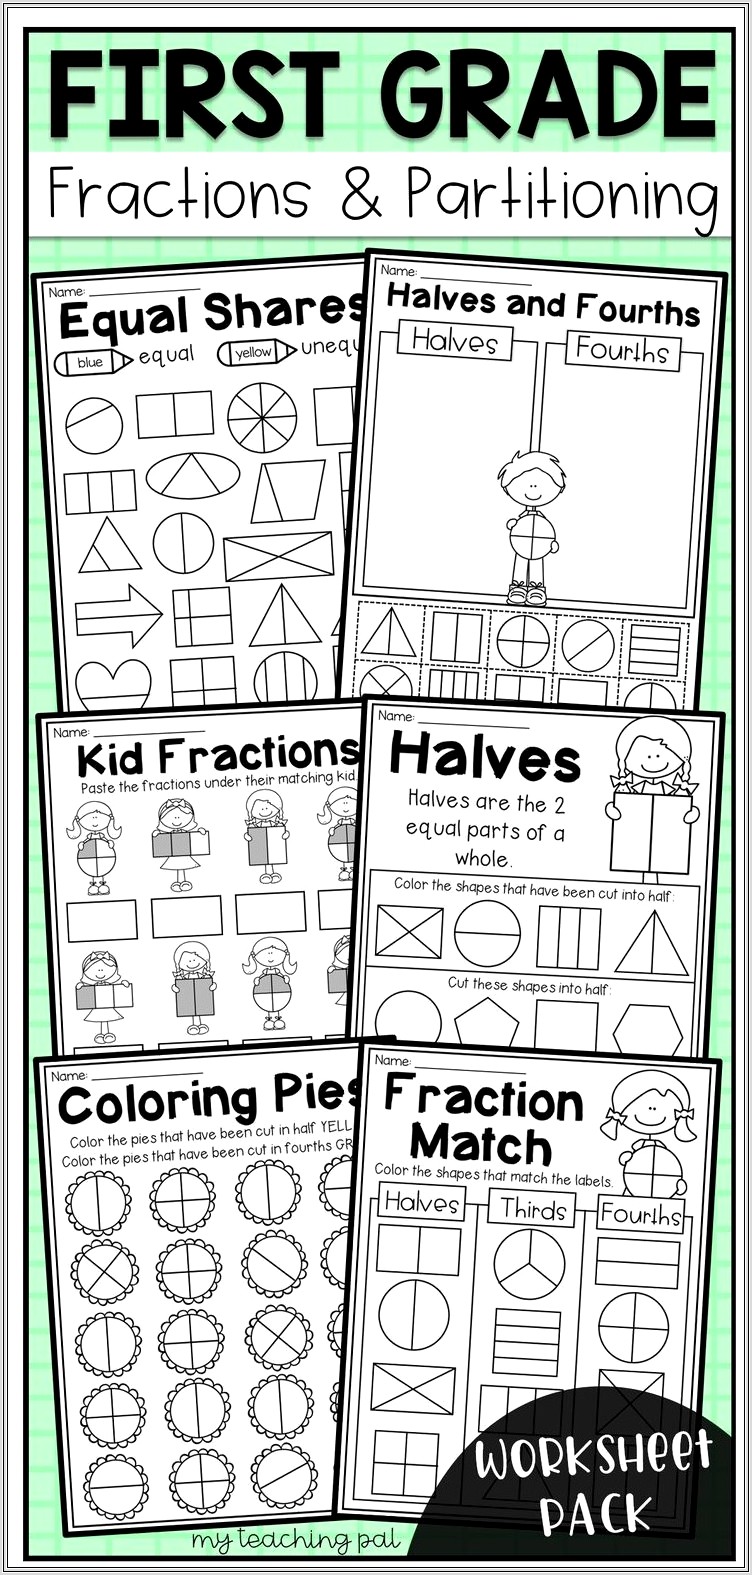 First Grade Worksheets For Fractions